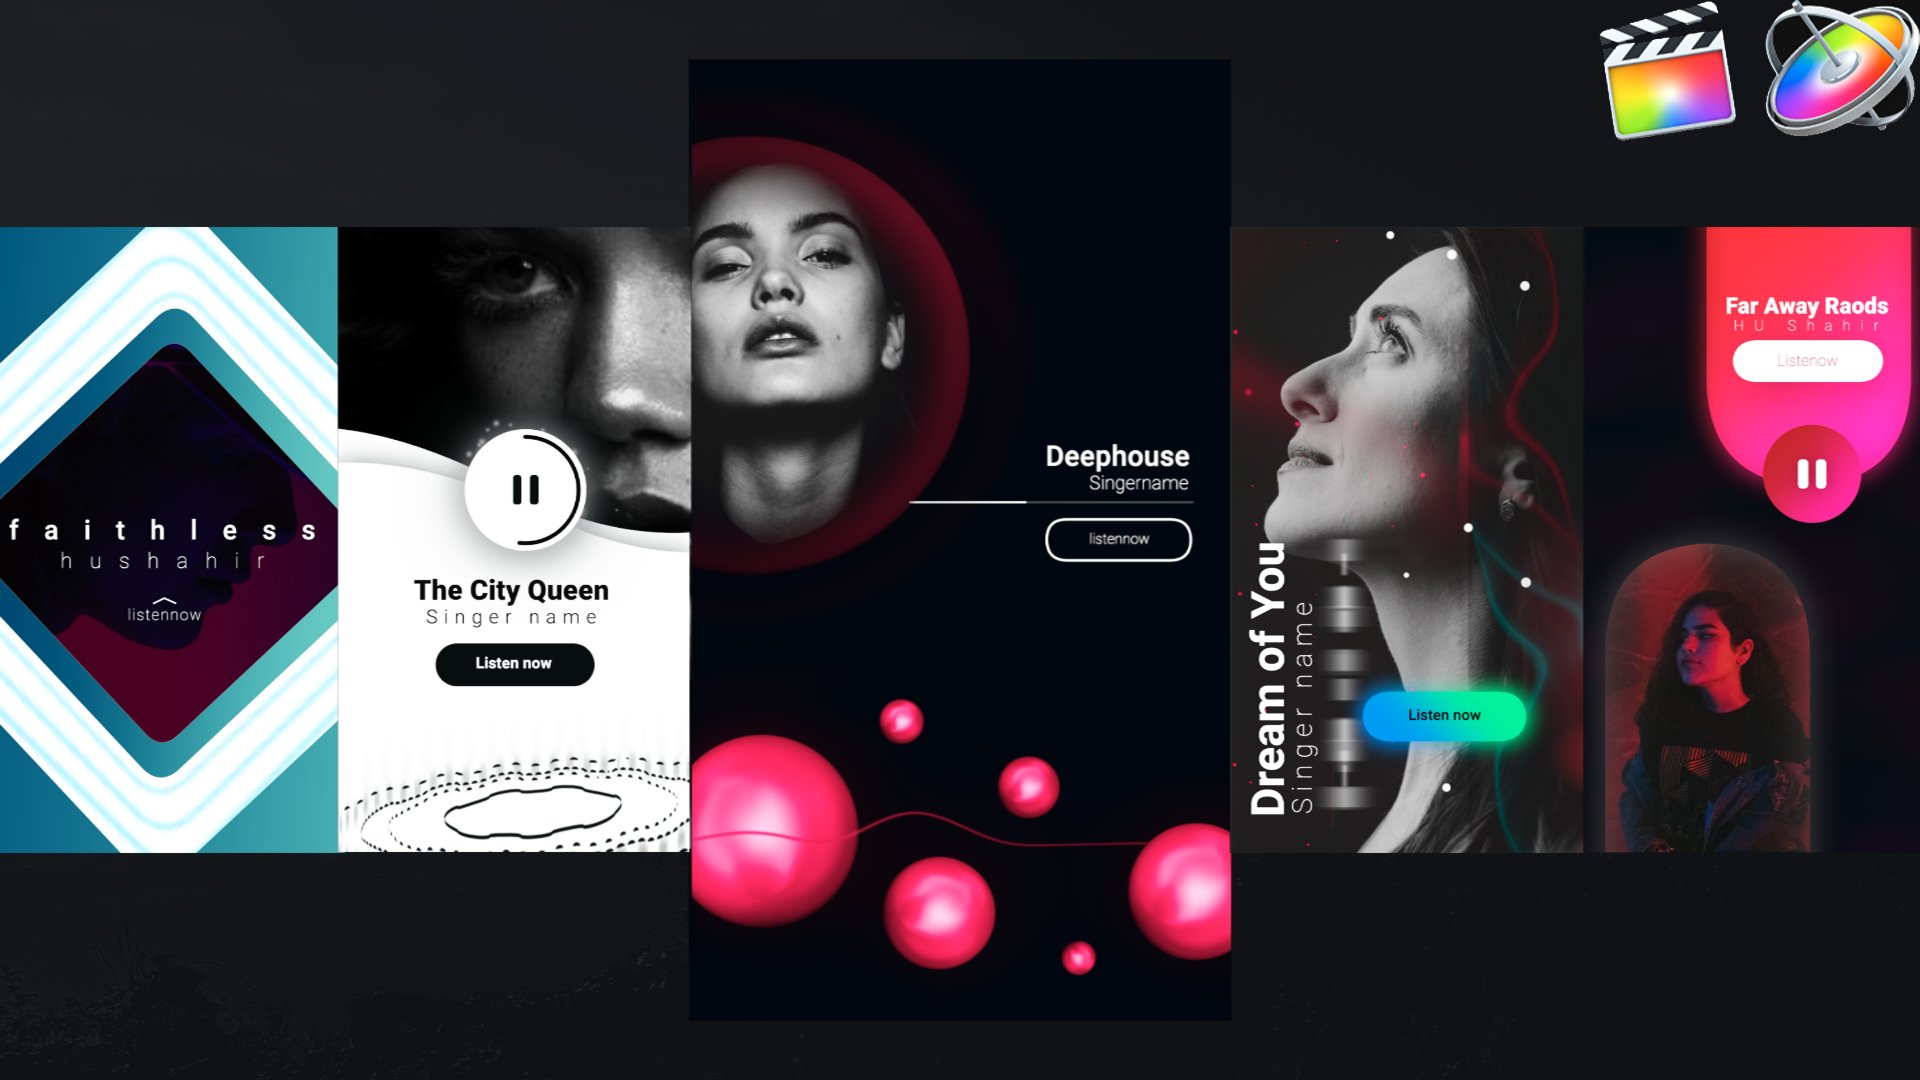 Instagram Dynamic Music Stories cover image.